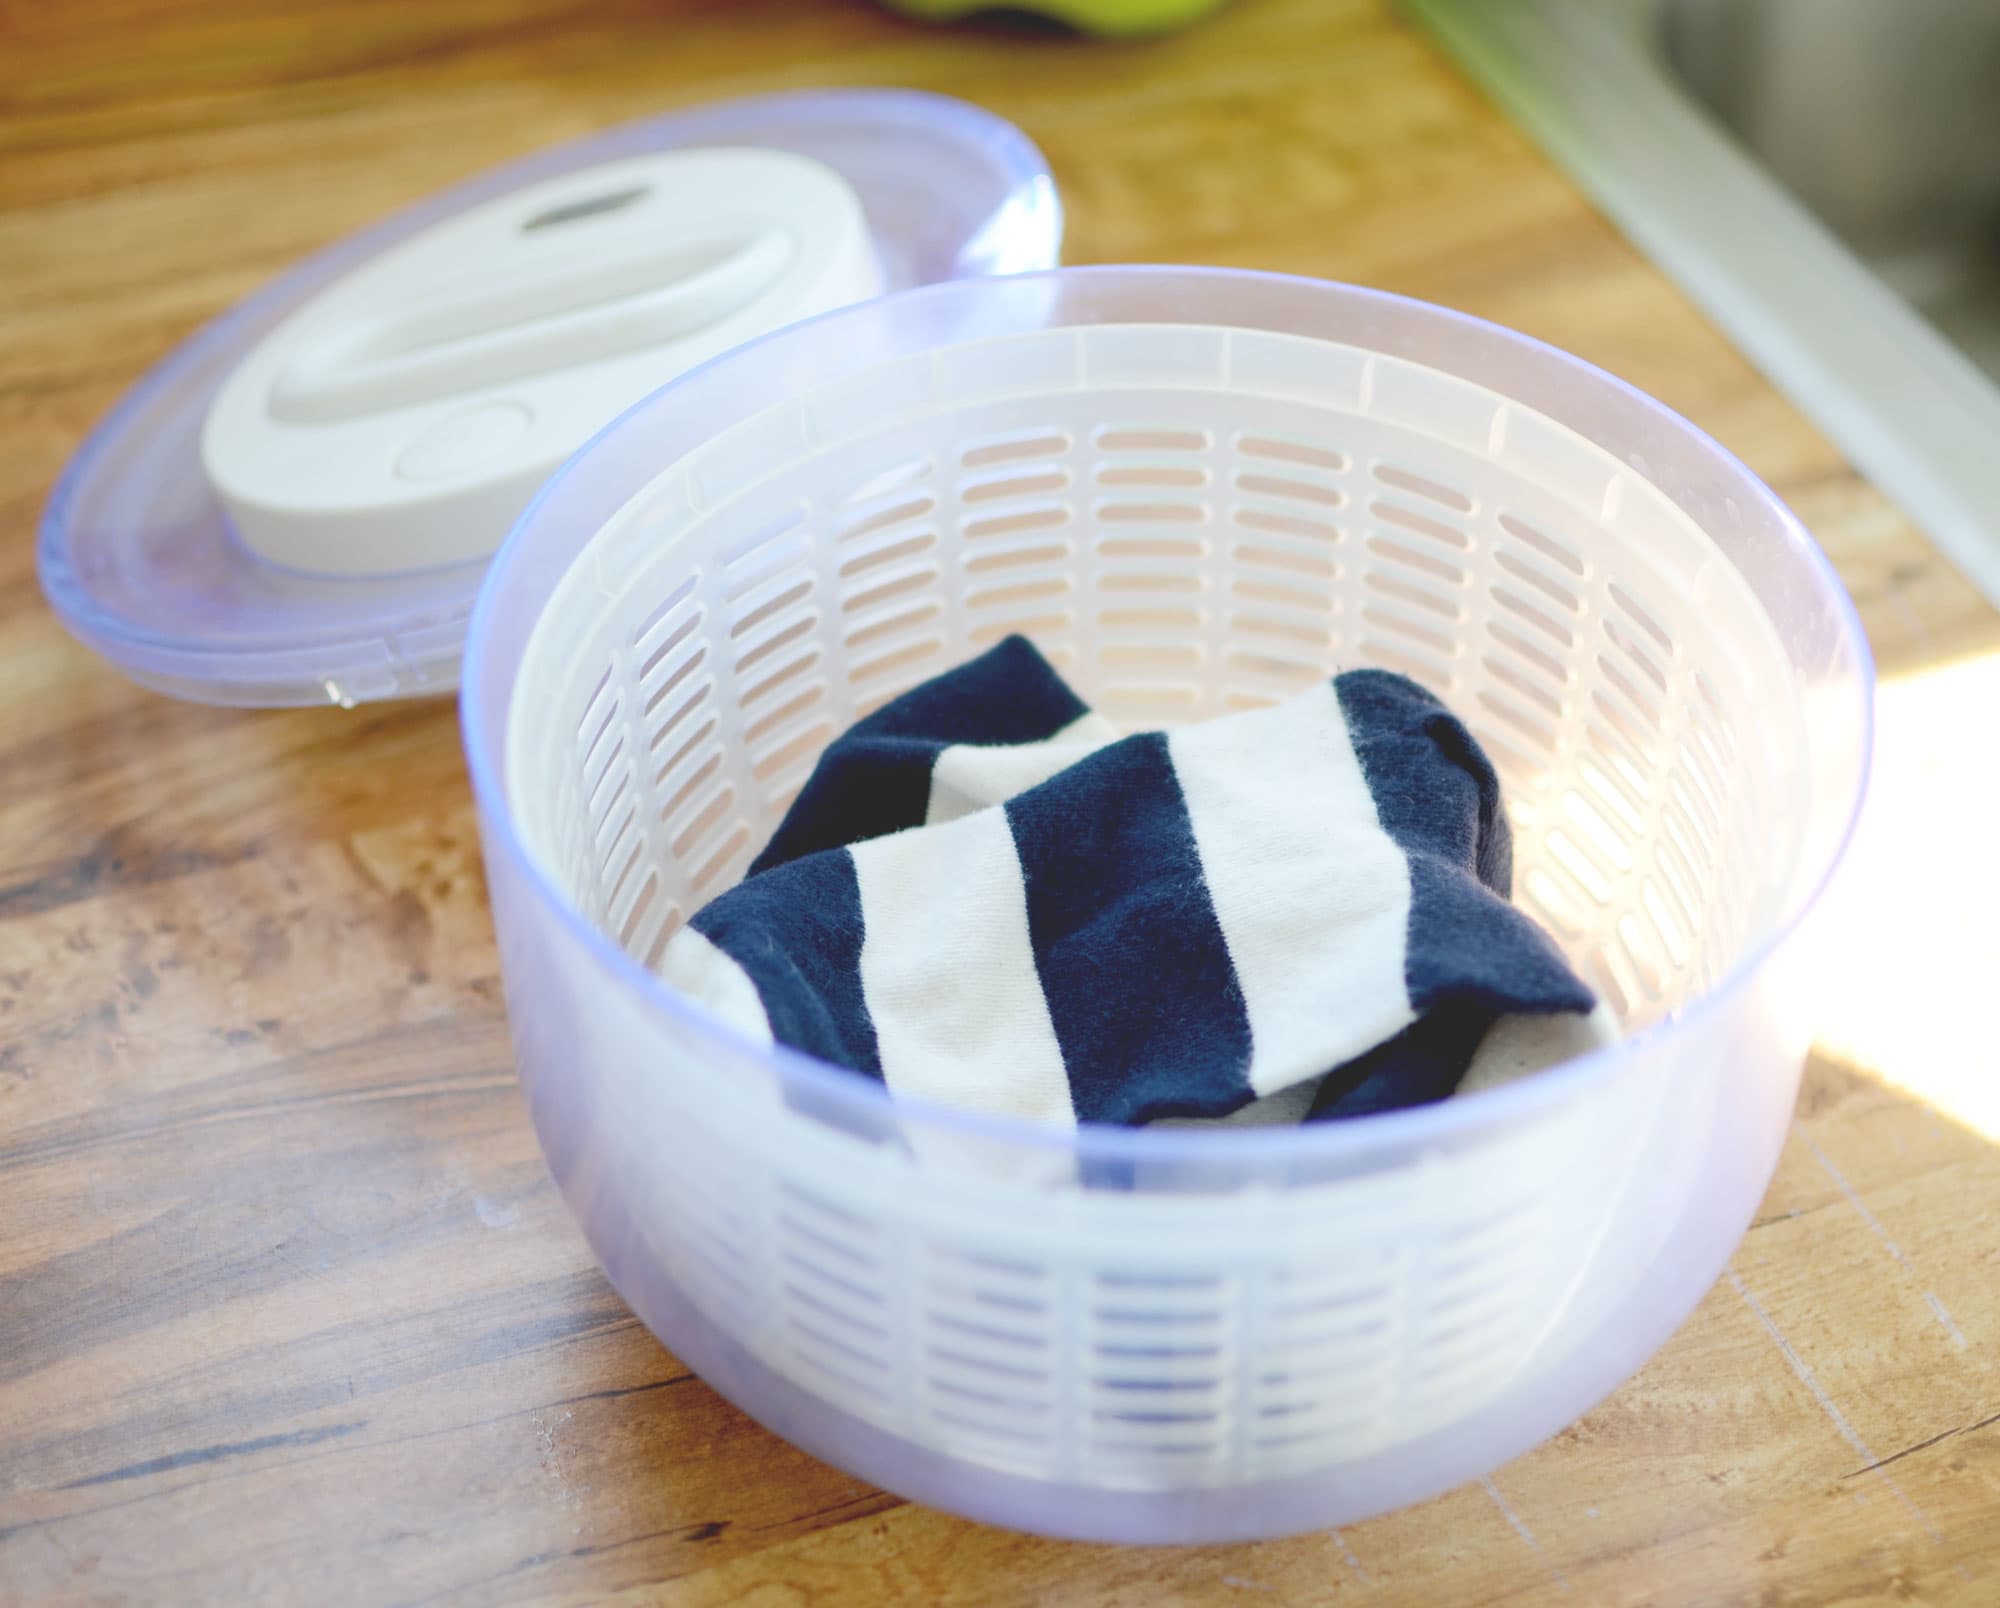 Quick Tip: Use a Salad Spinner For Quickly Drying Small Clothing Items